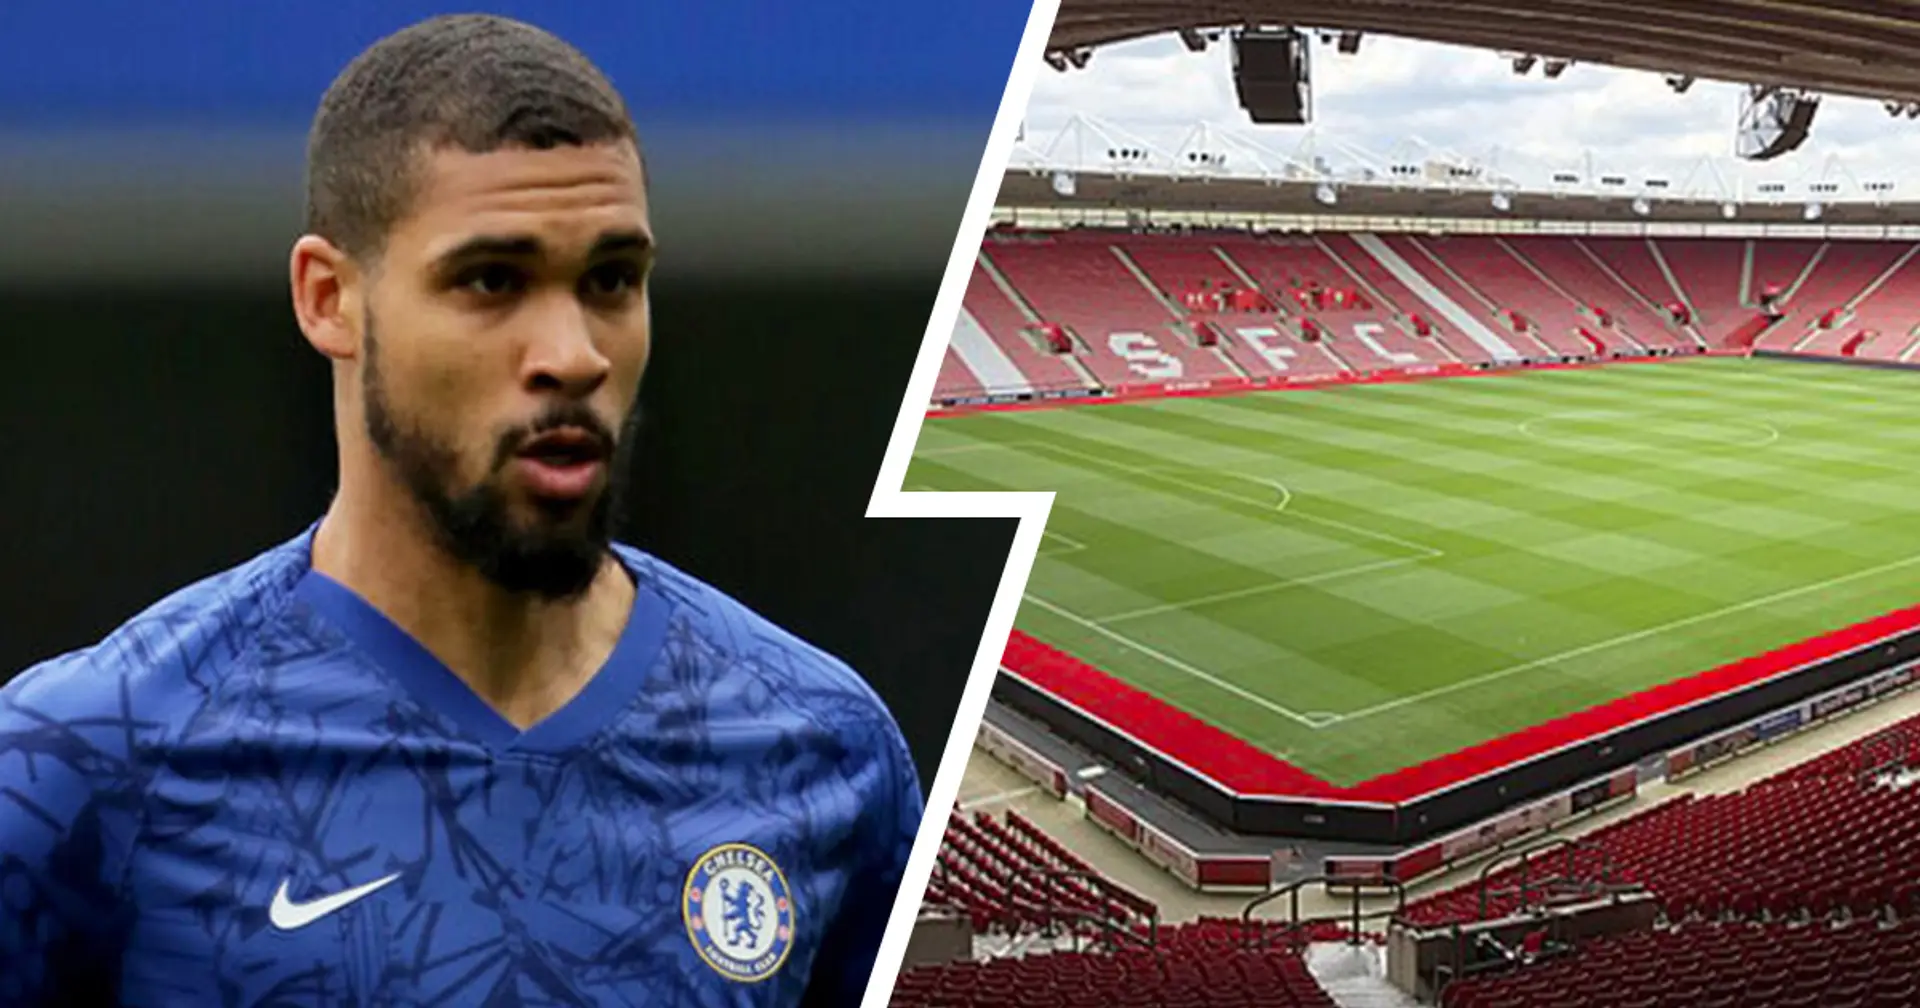 Loftus-Cheek's possible future destinations revealed – leaving England among the options